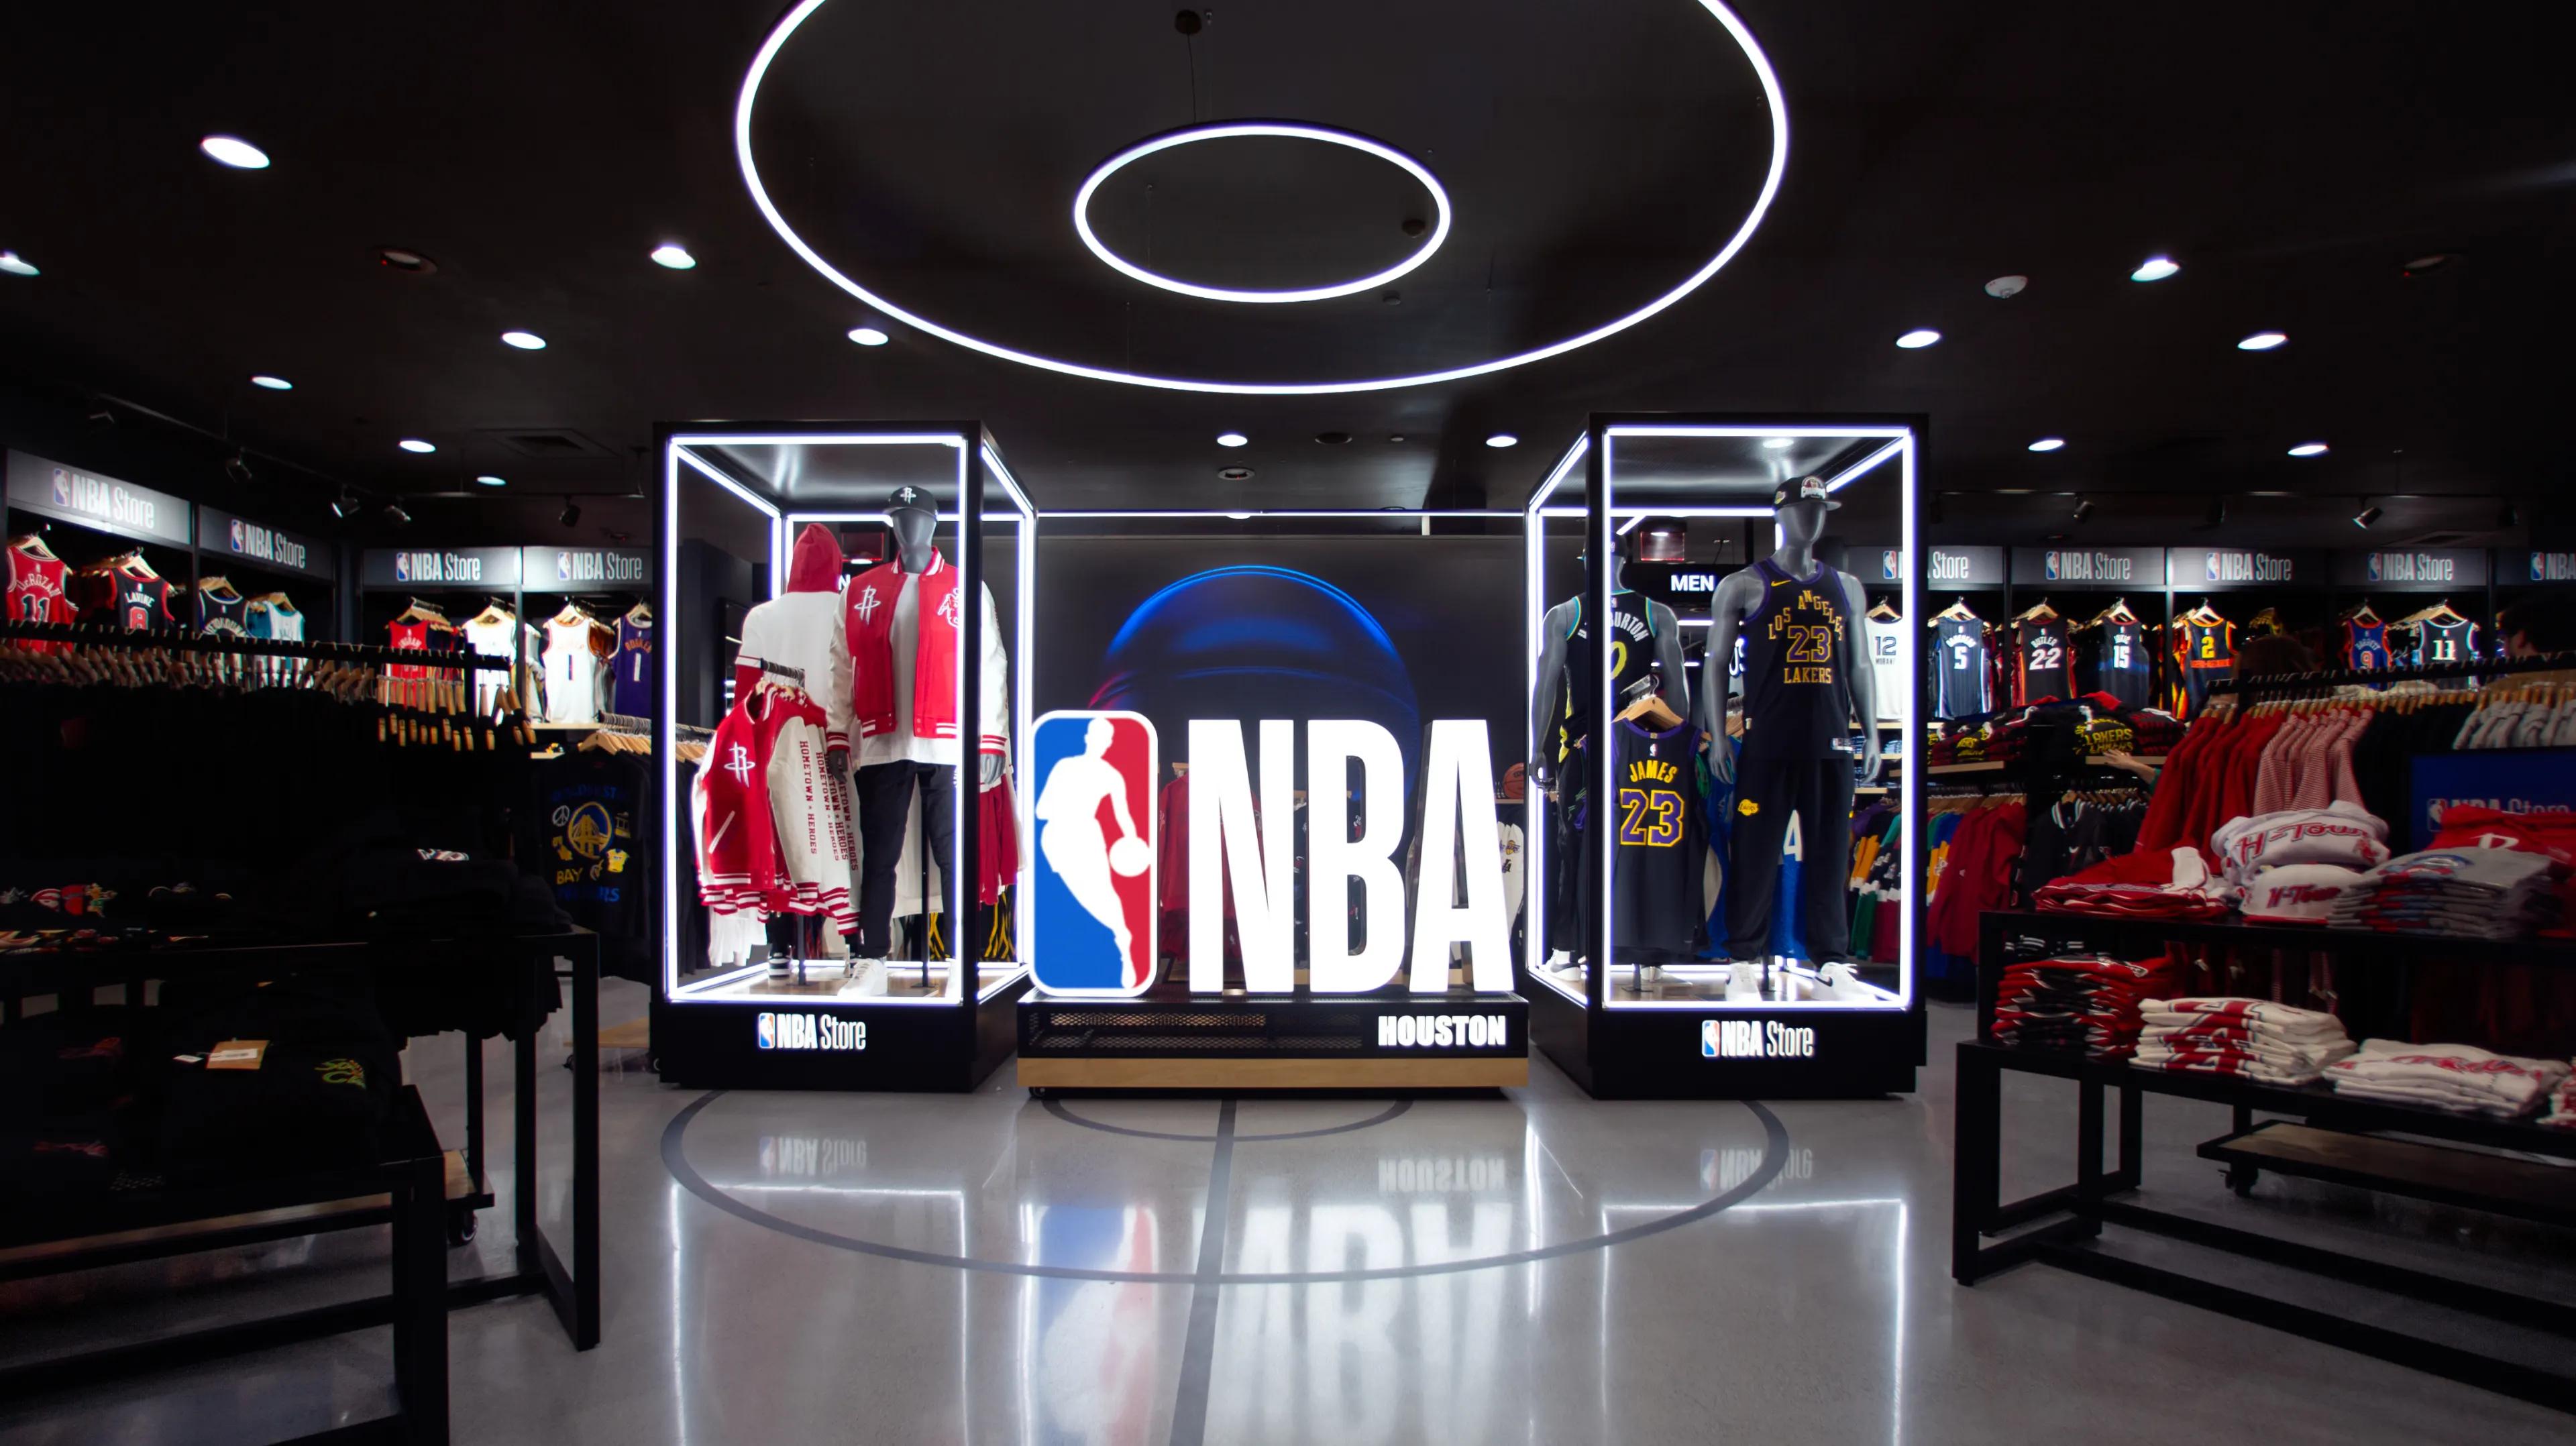 Interior shot of the NBA Flagship Experience by Next/Now